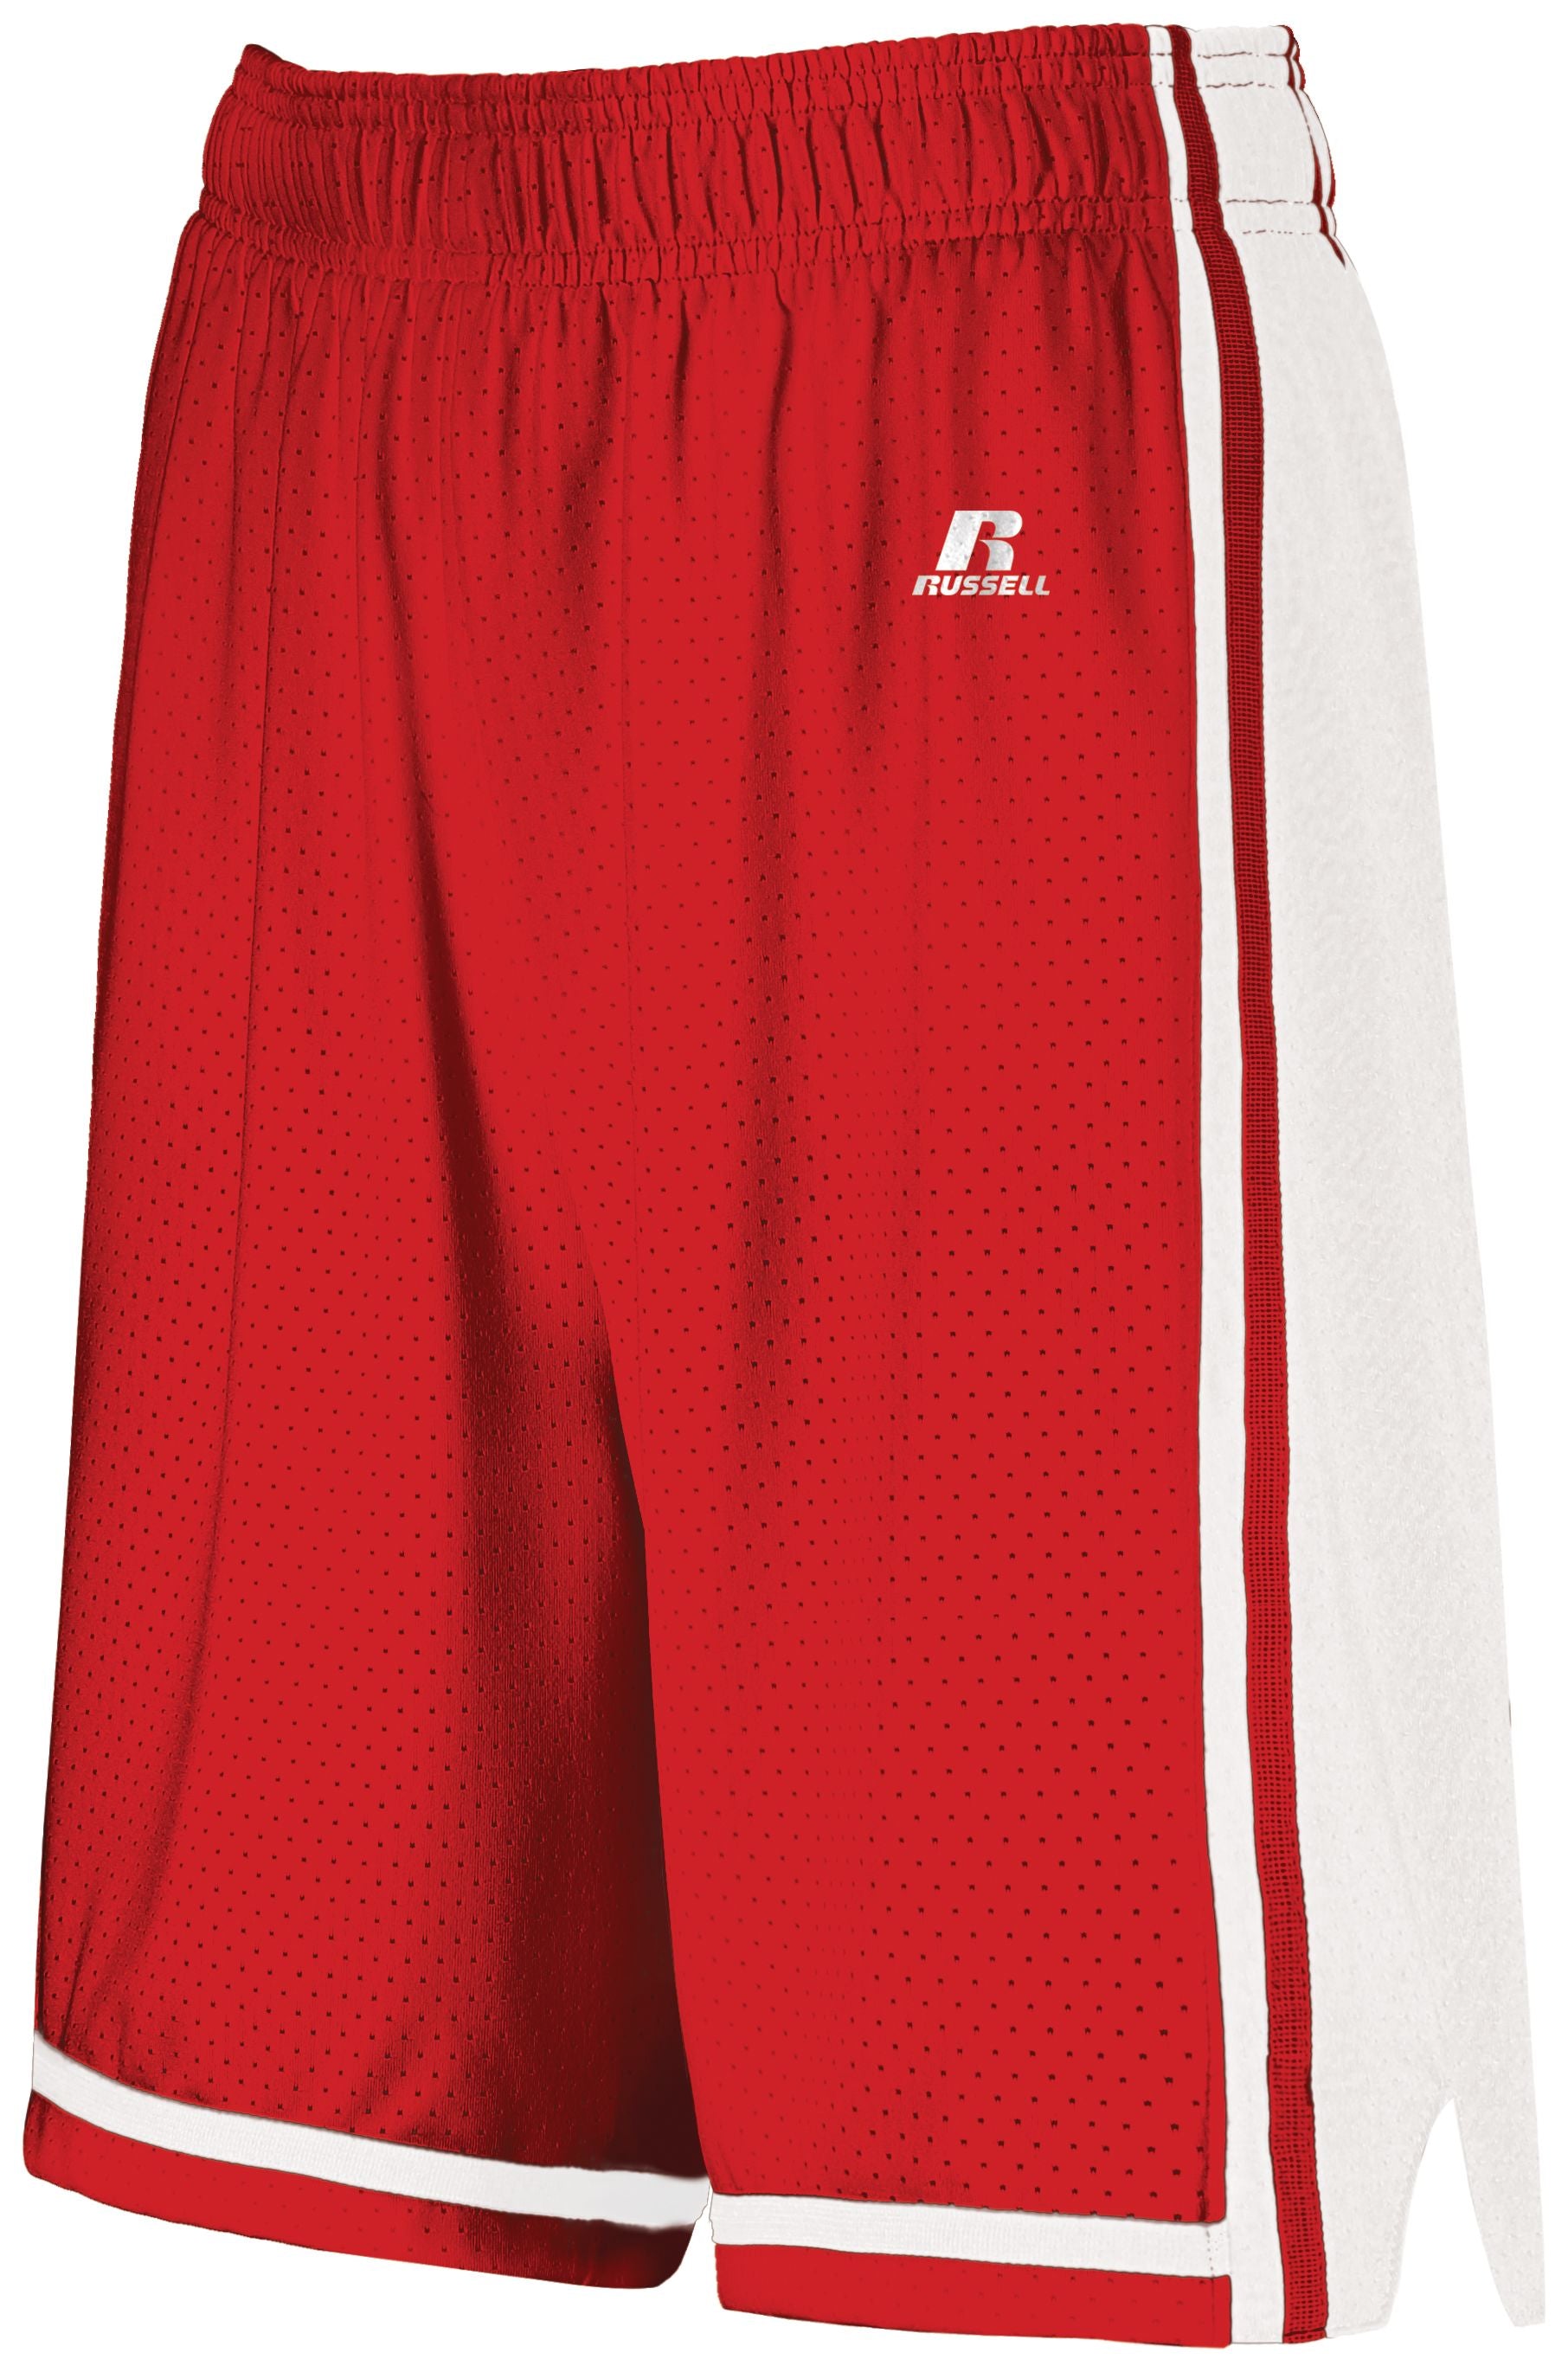 Russell Athletic Ladies Legacy Basketball Shorts in True Red/White  -Part of the Ladies, Ladies-Shorts, Basketball, Russell-Athletic-Products, All-Sports, All-Sports-1 product lines at KanaleyCreations.com